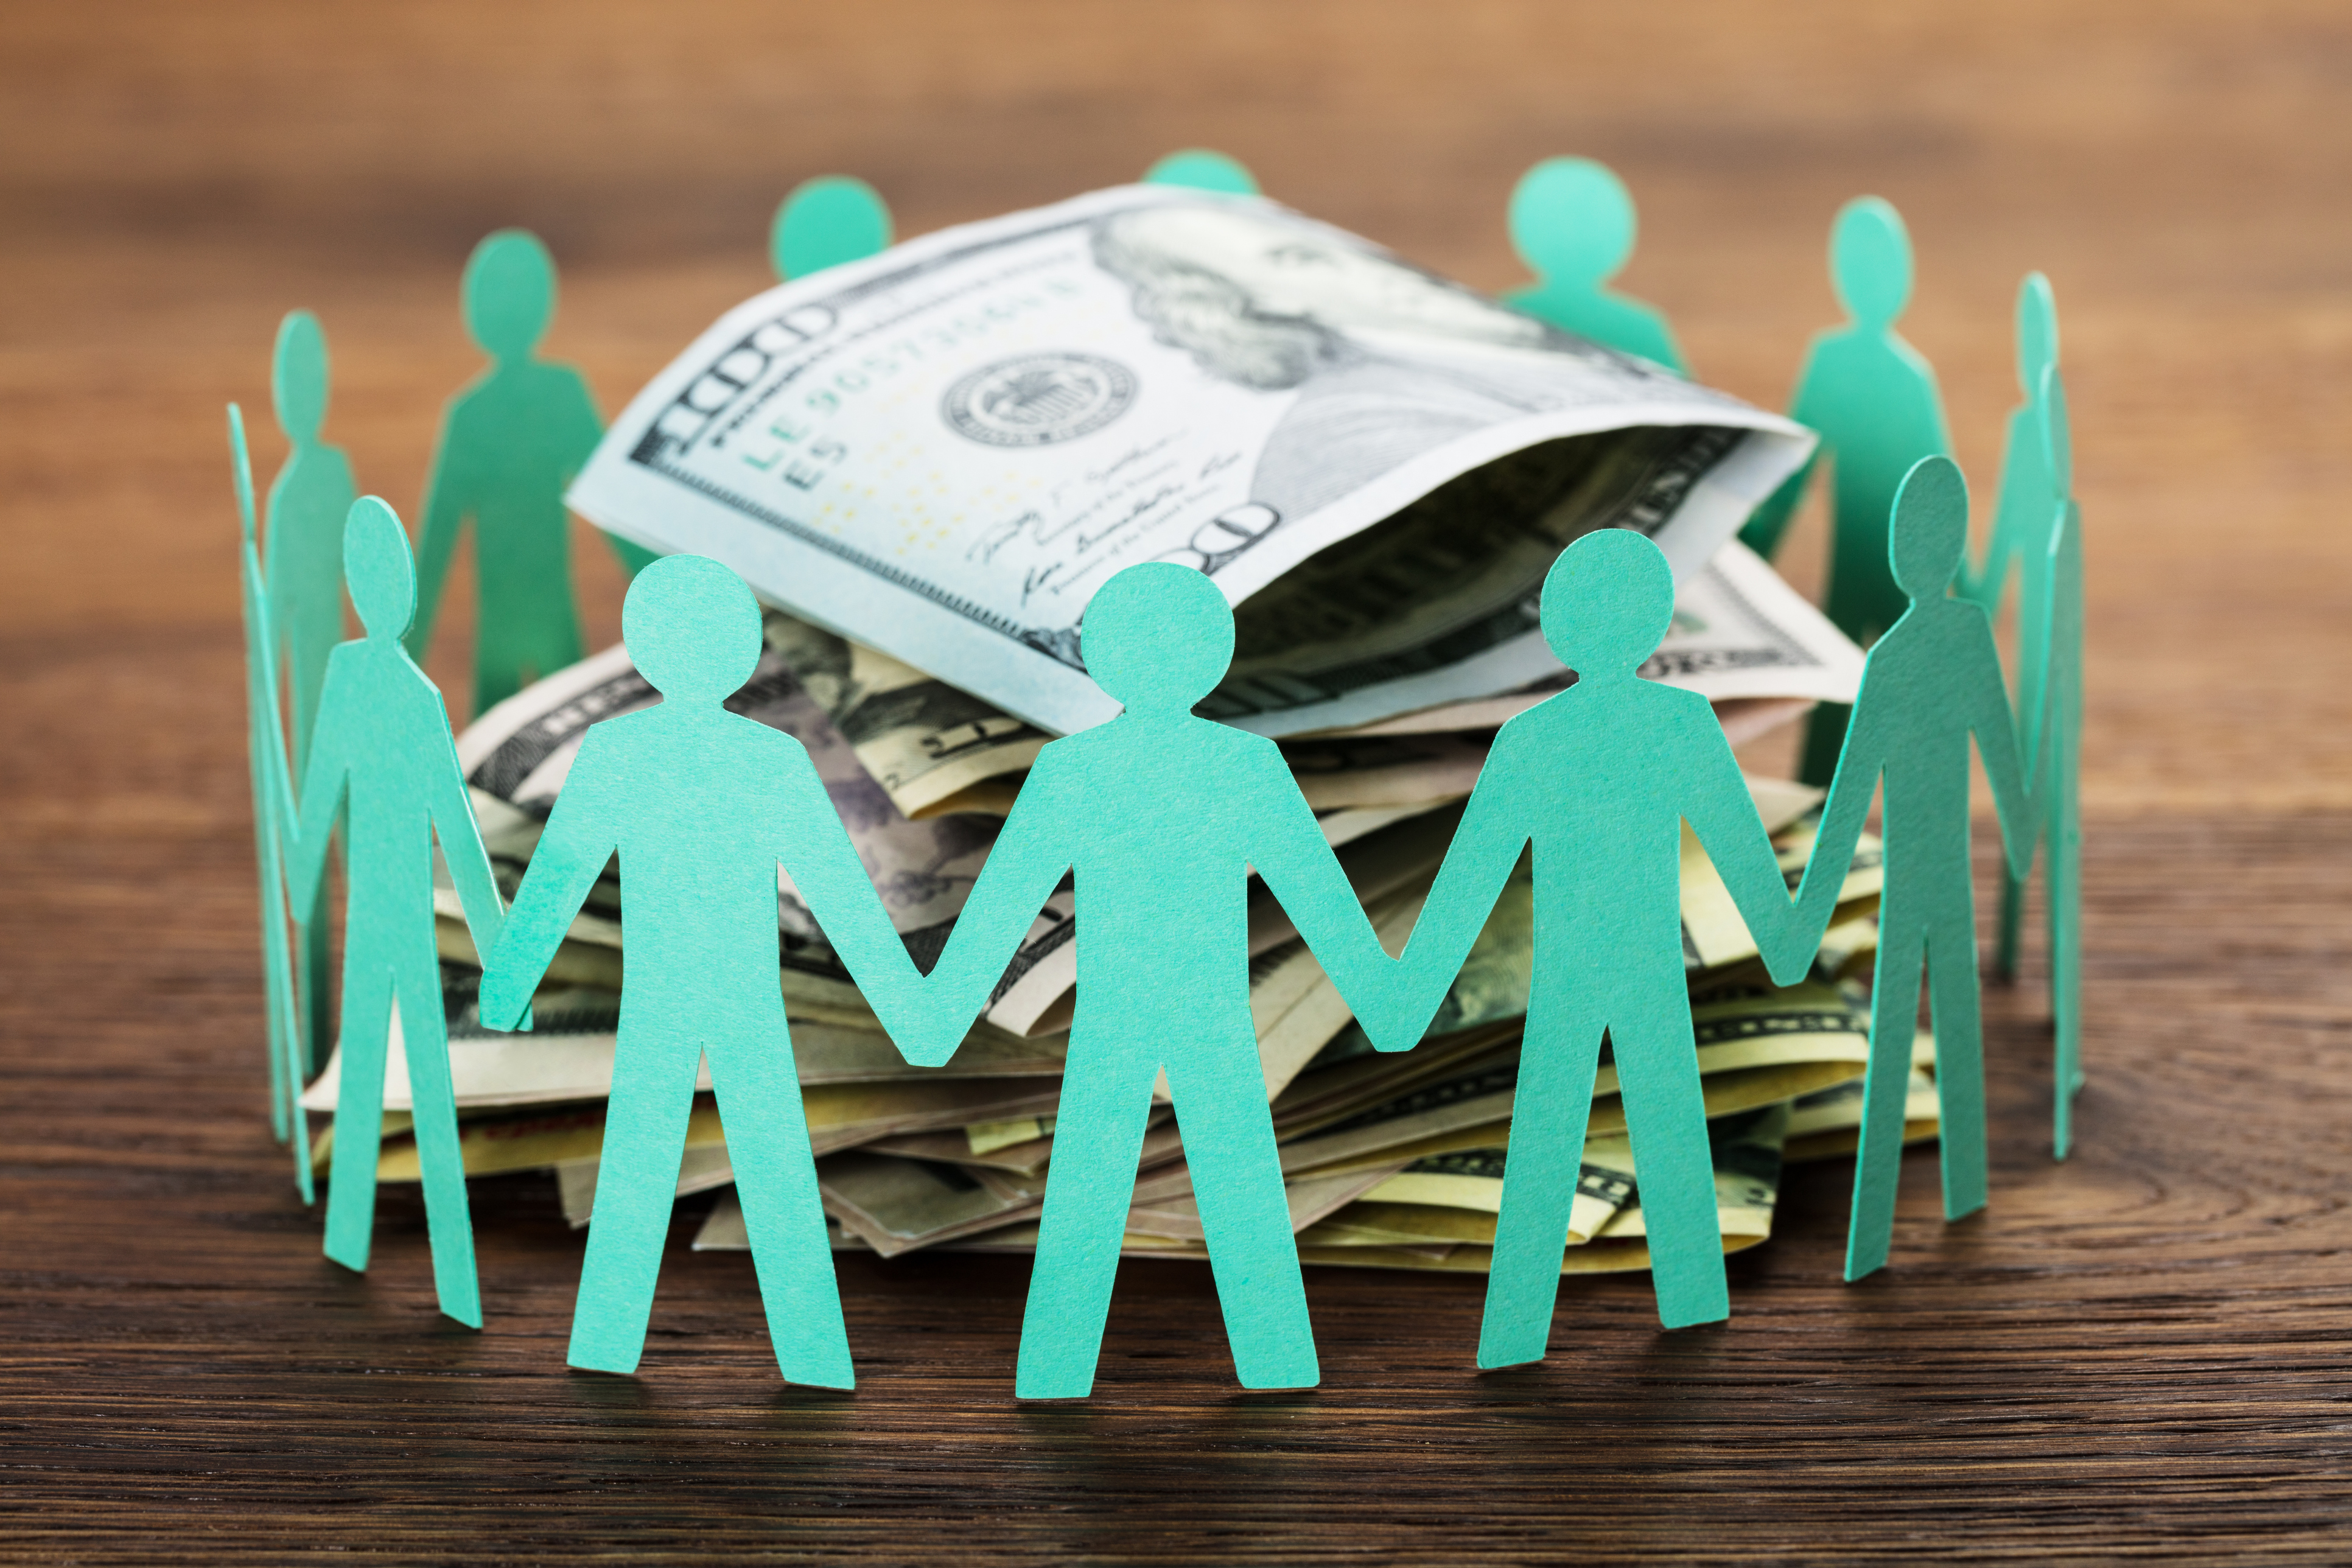 Designing the Best Reward Structure for Crowdfunding Campaigns